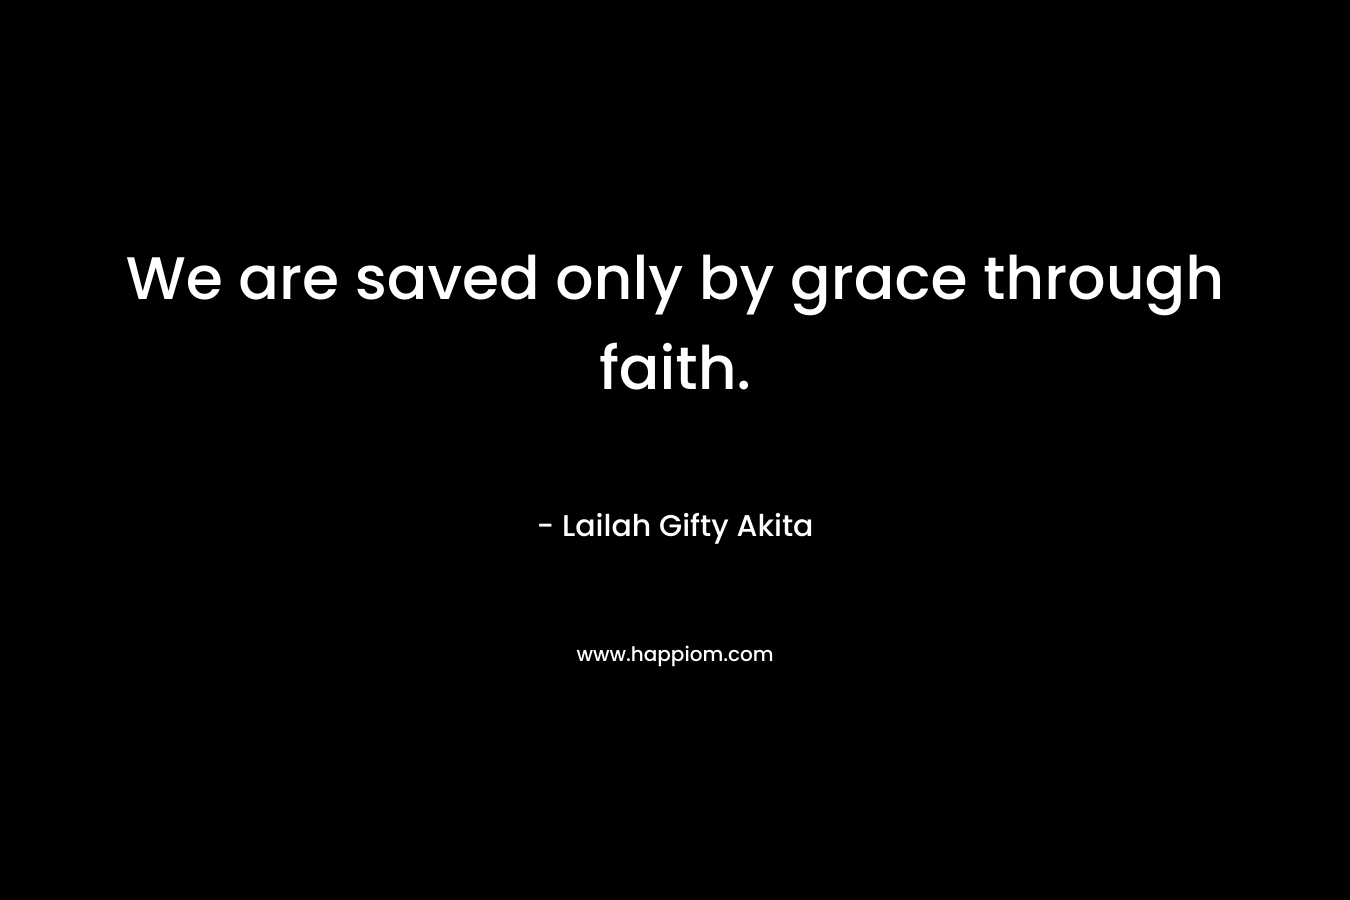 We are saved only by grace through faith.